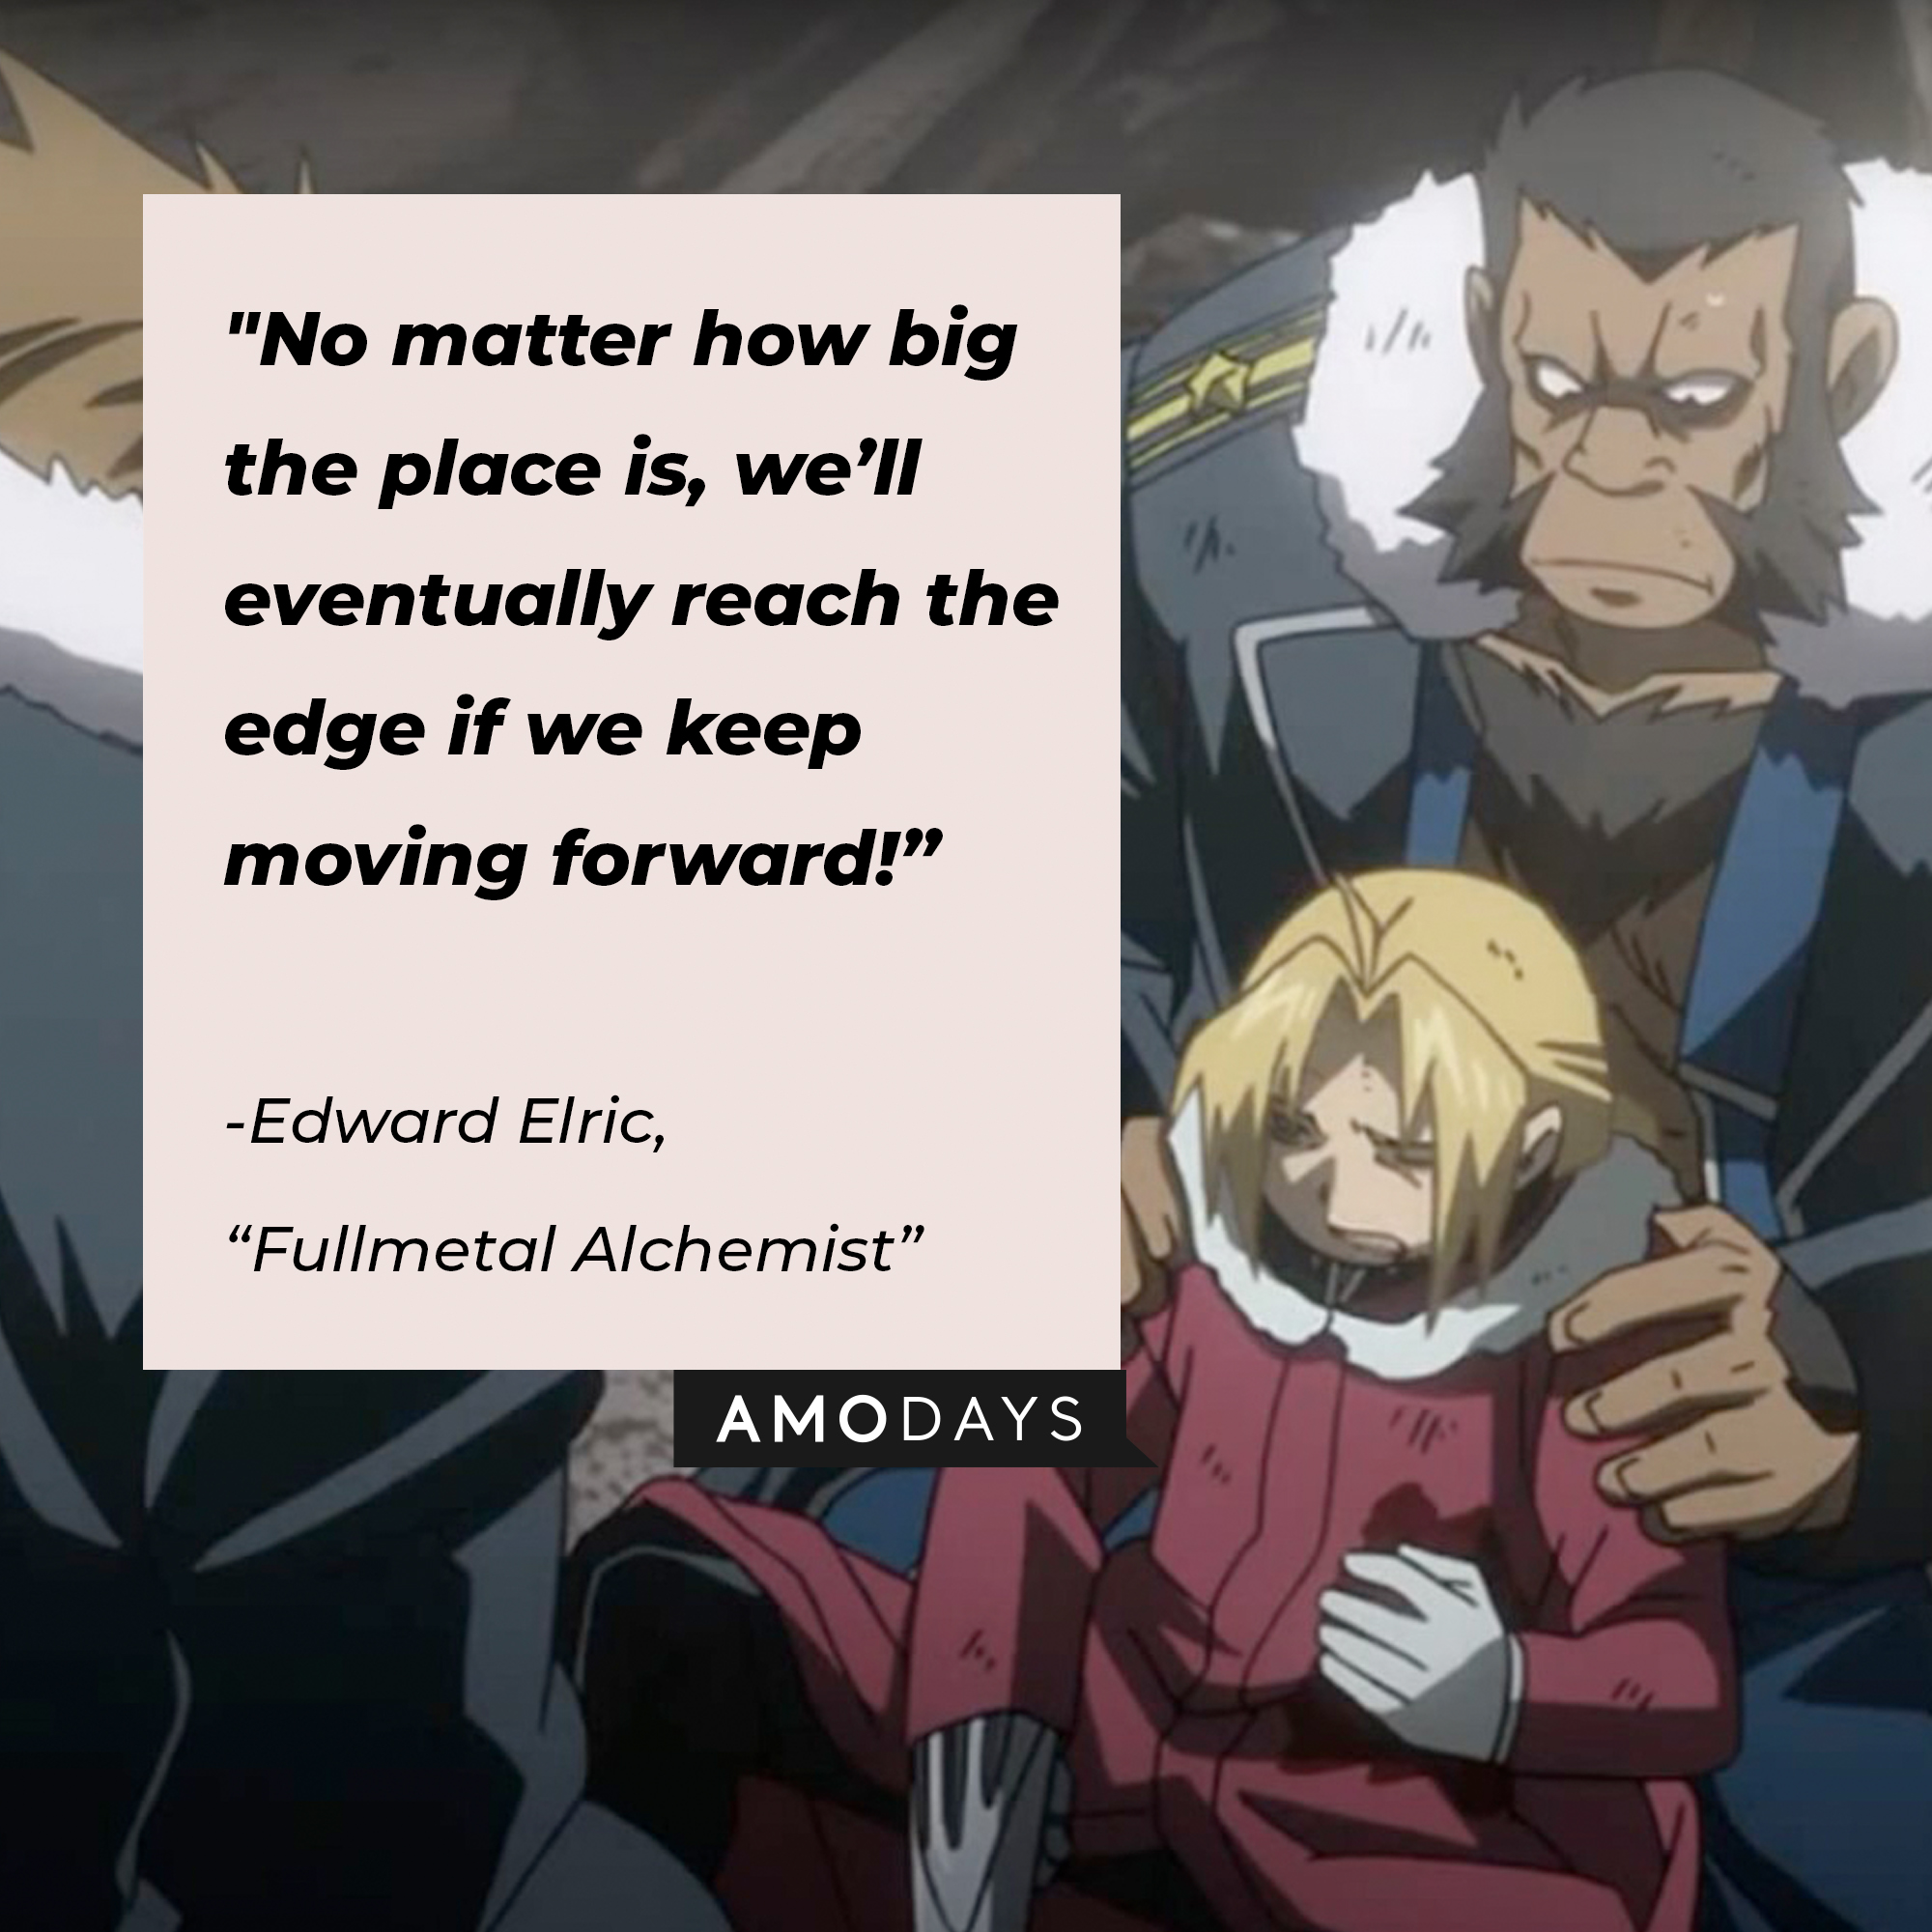 Edward Elric's quote: "No matter how big the place is, we’ll eventually reach the edge if we keep moving forward!” | Image: facebook.com/FMAHiromuArakawa